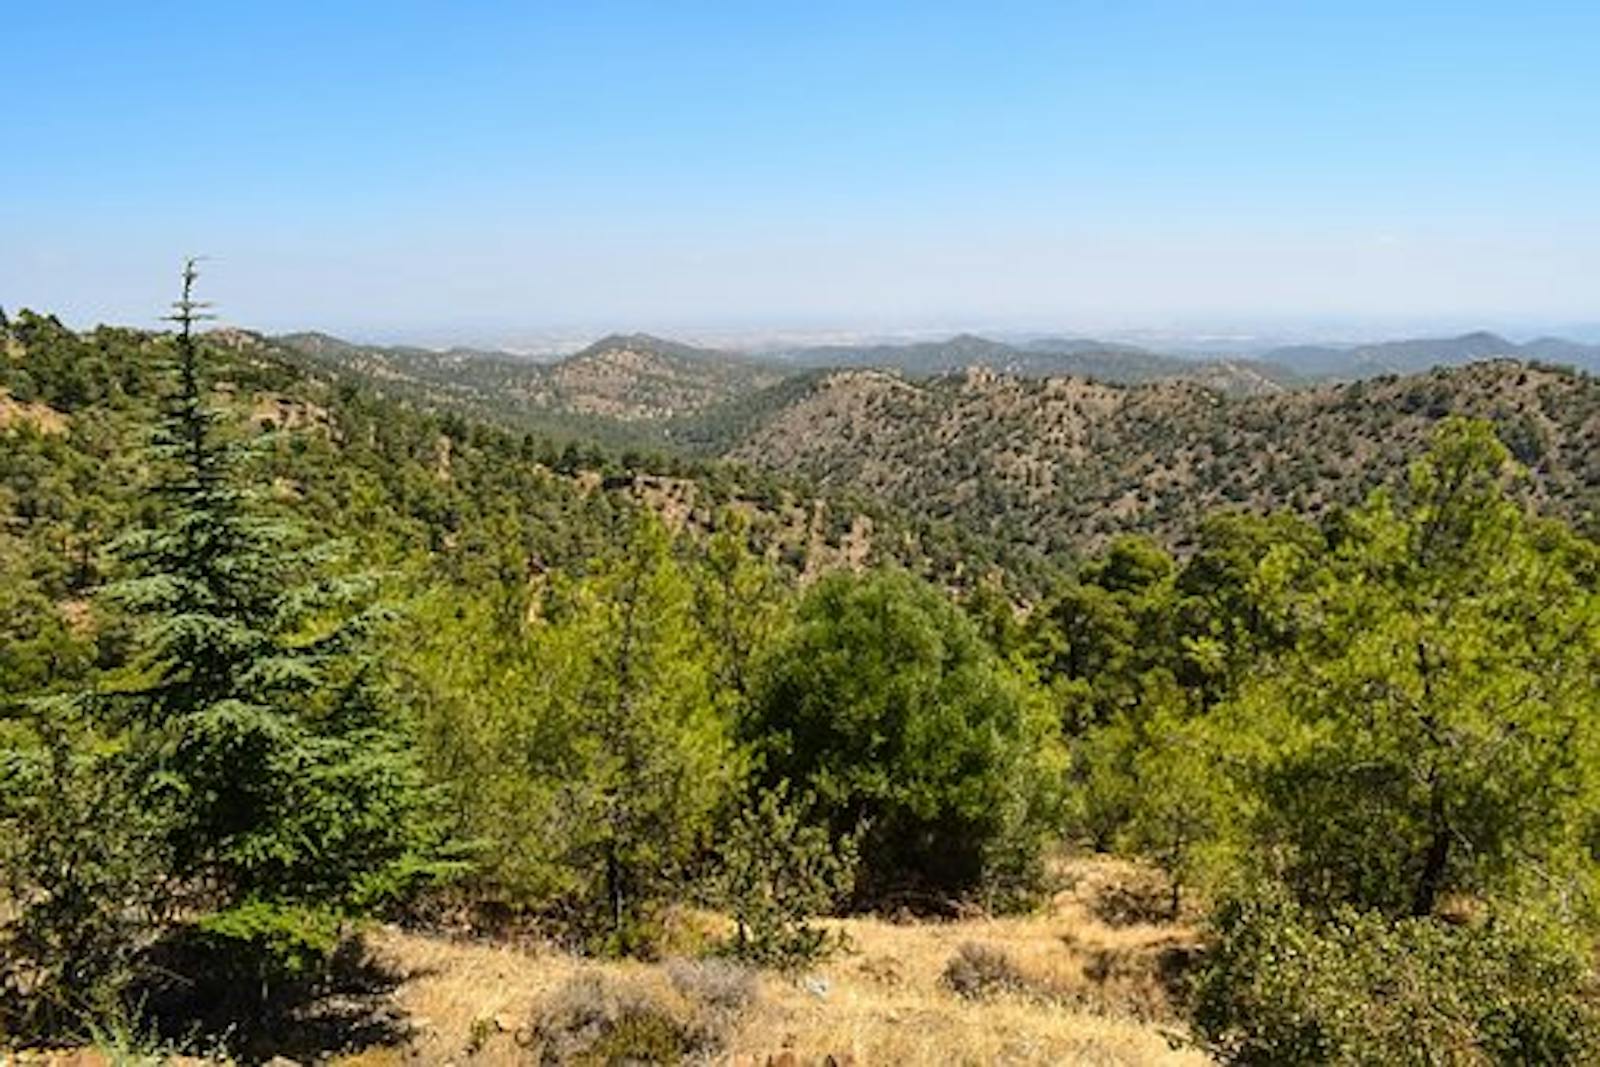 Cyprus Mediterranean Forests | One Earth